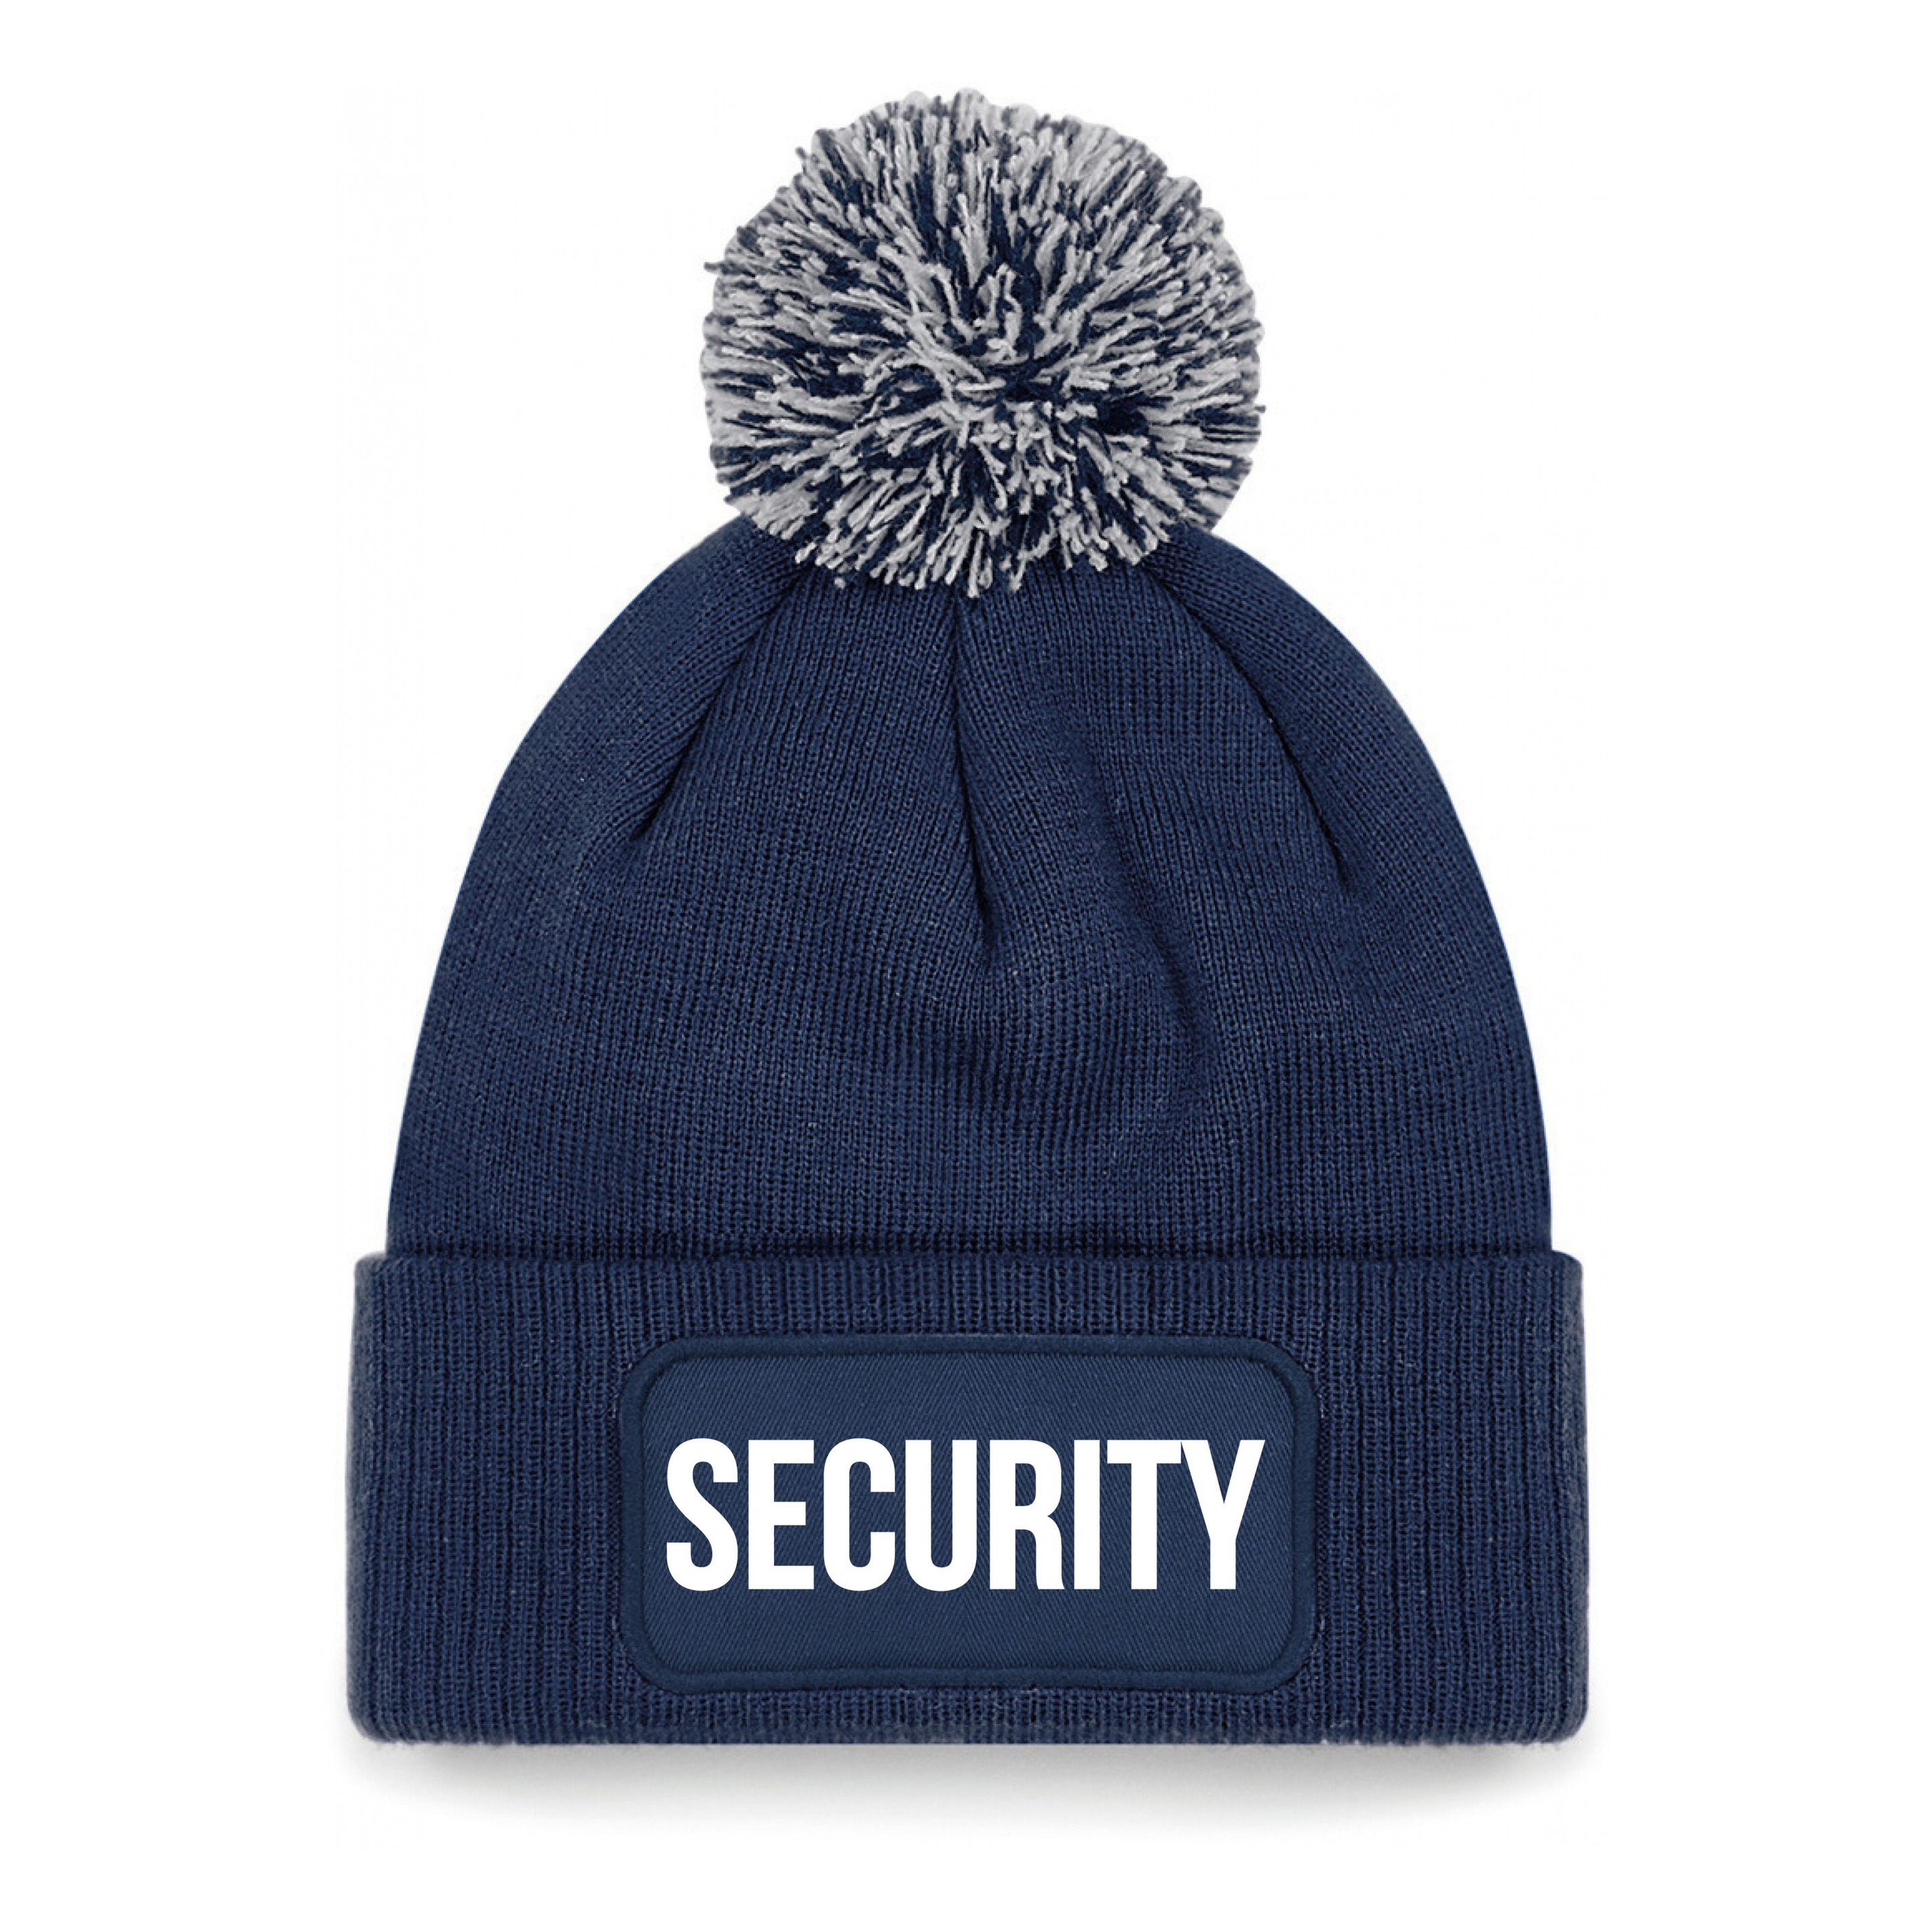 Security muts met pompon unisex - one size - navy - apres-ski muts One size -